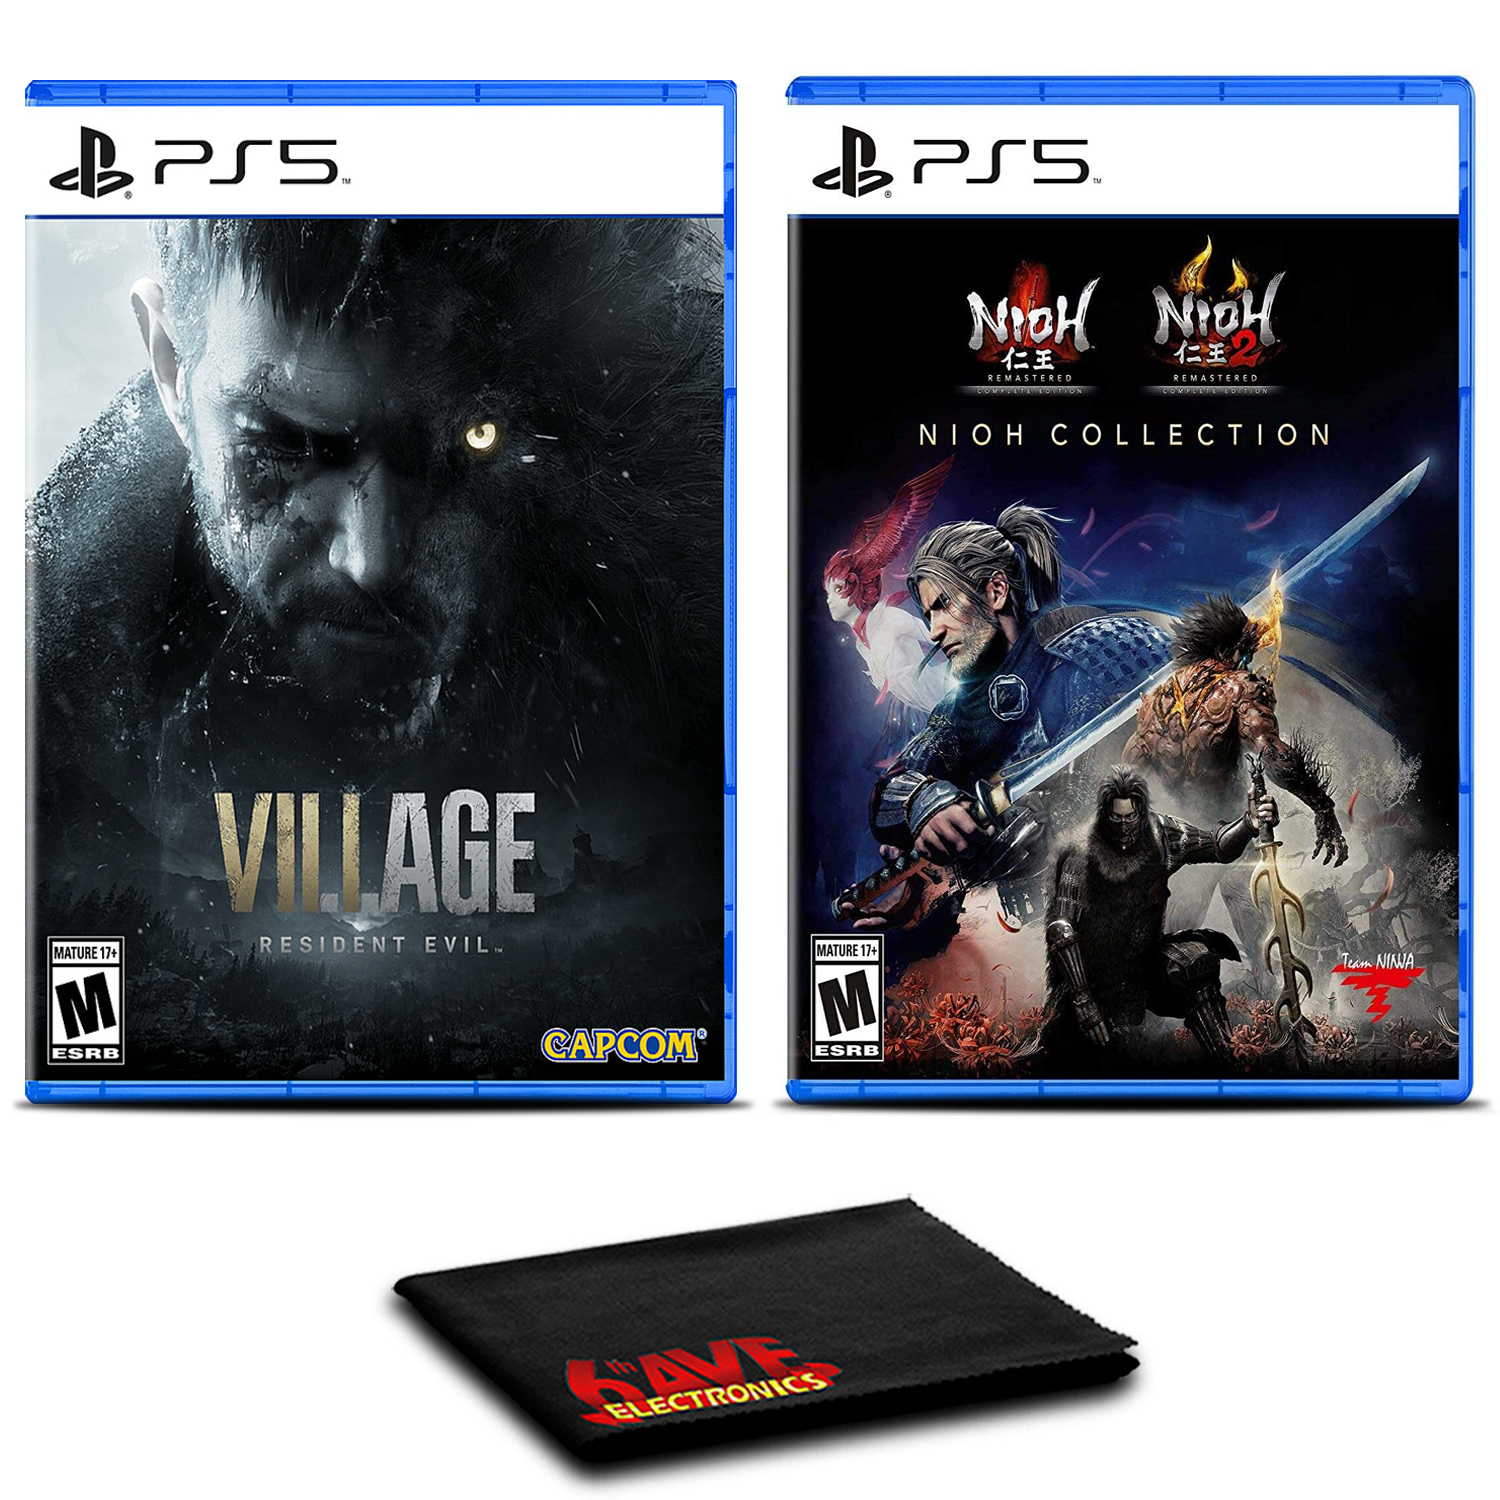 Resident Evil Village And The Nioh Collection - Two Games For PS5 - $144.00